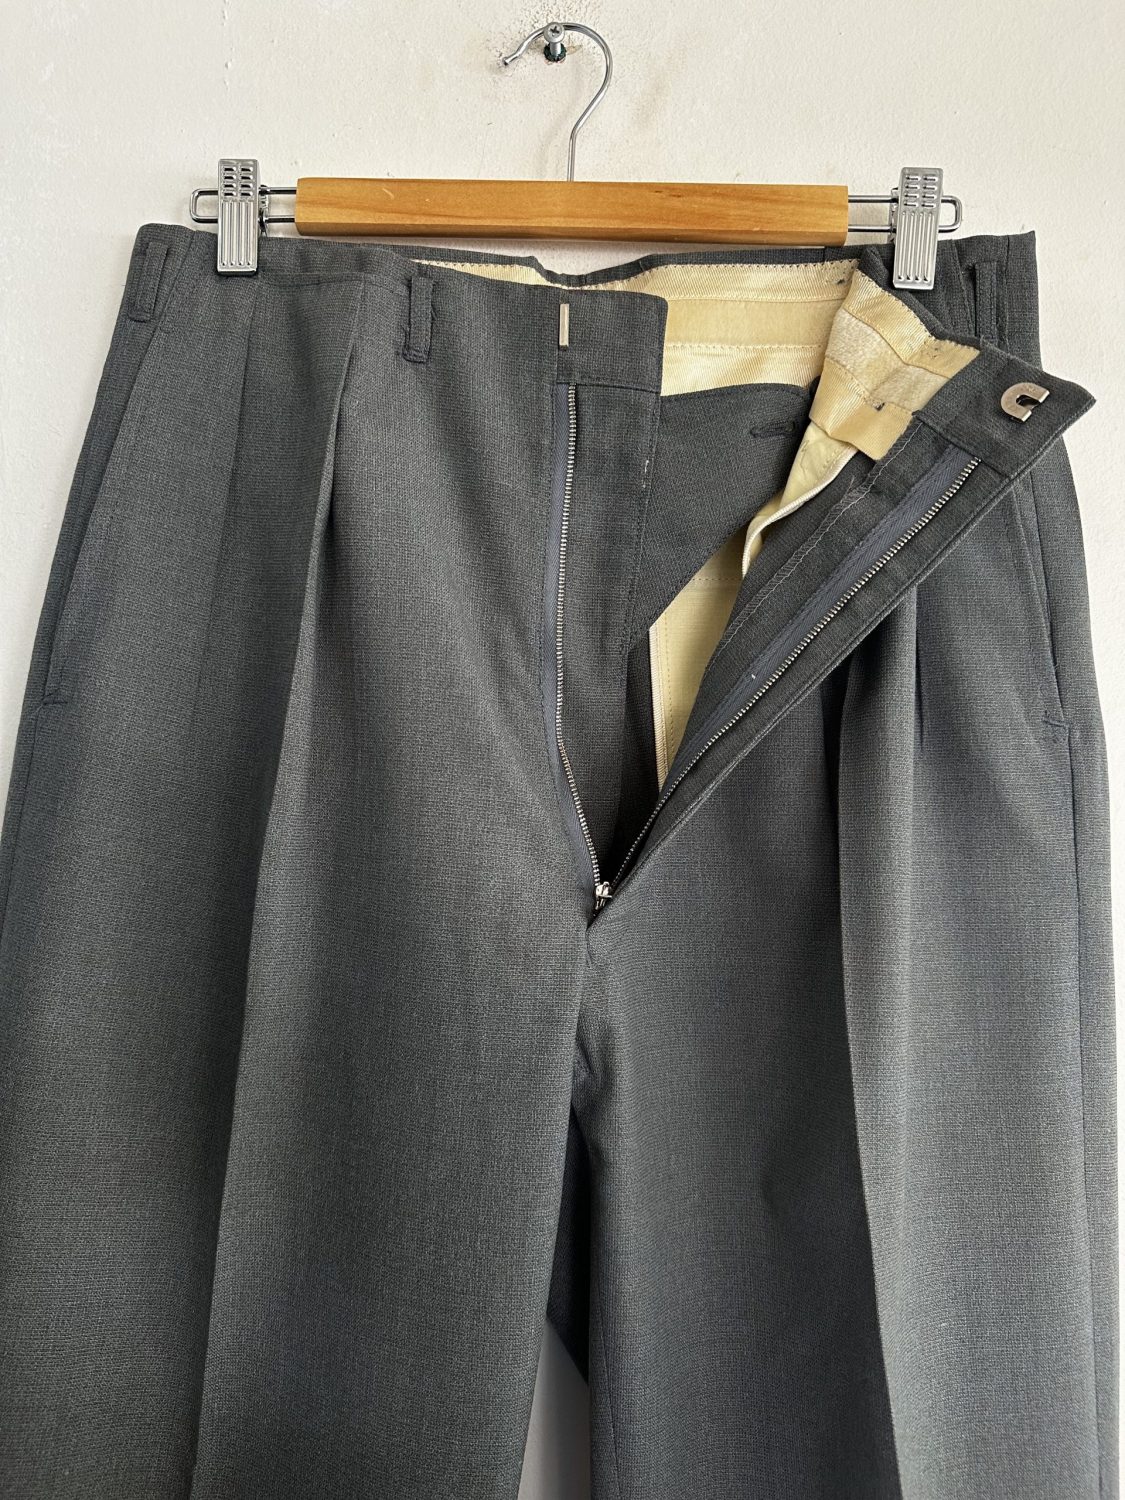 DEADSTOCK HV TROUSERS BY VARLEY 40S MEN'S LIMED ASH PANTS W30 X 30 ...